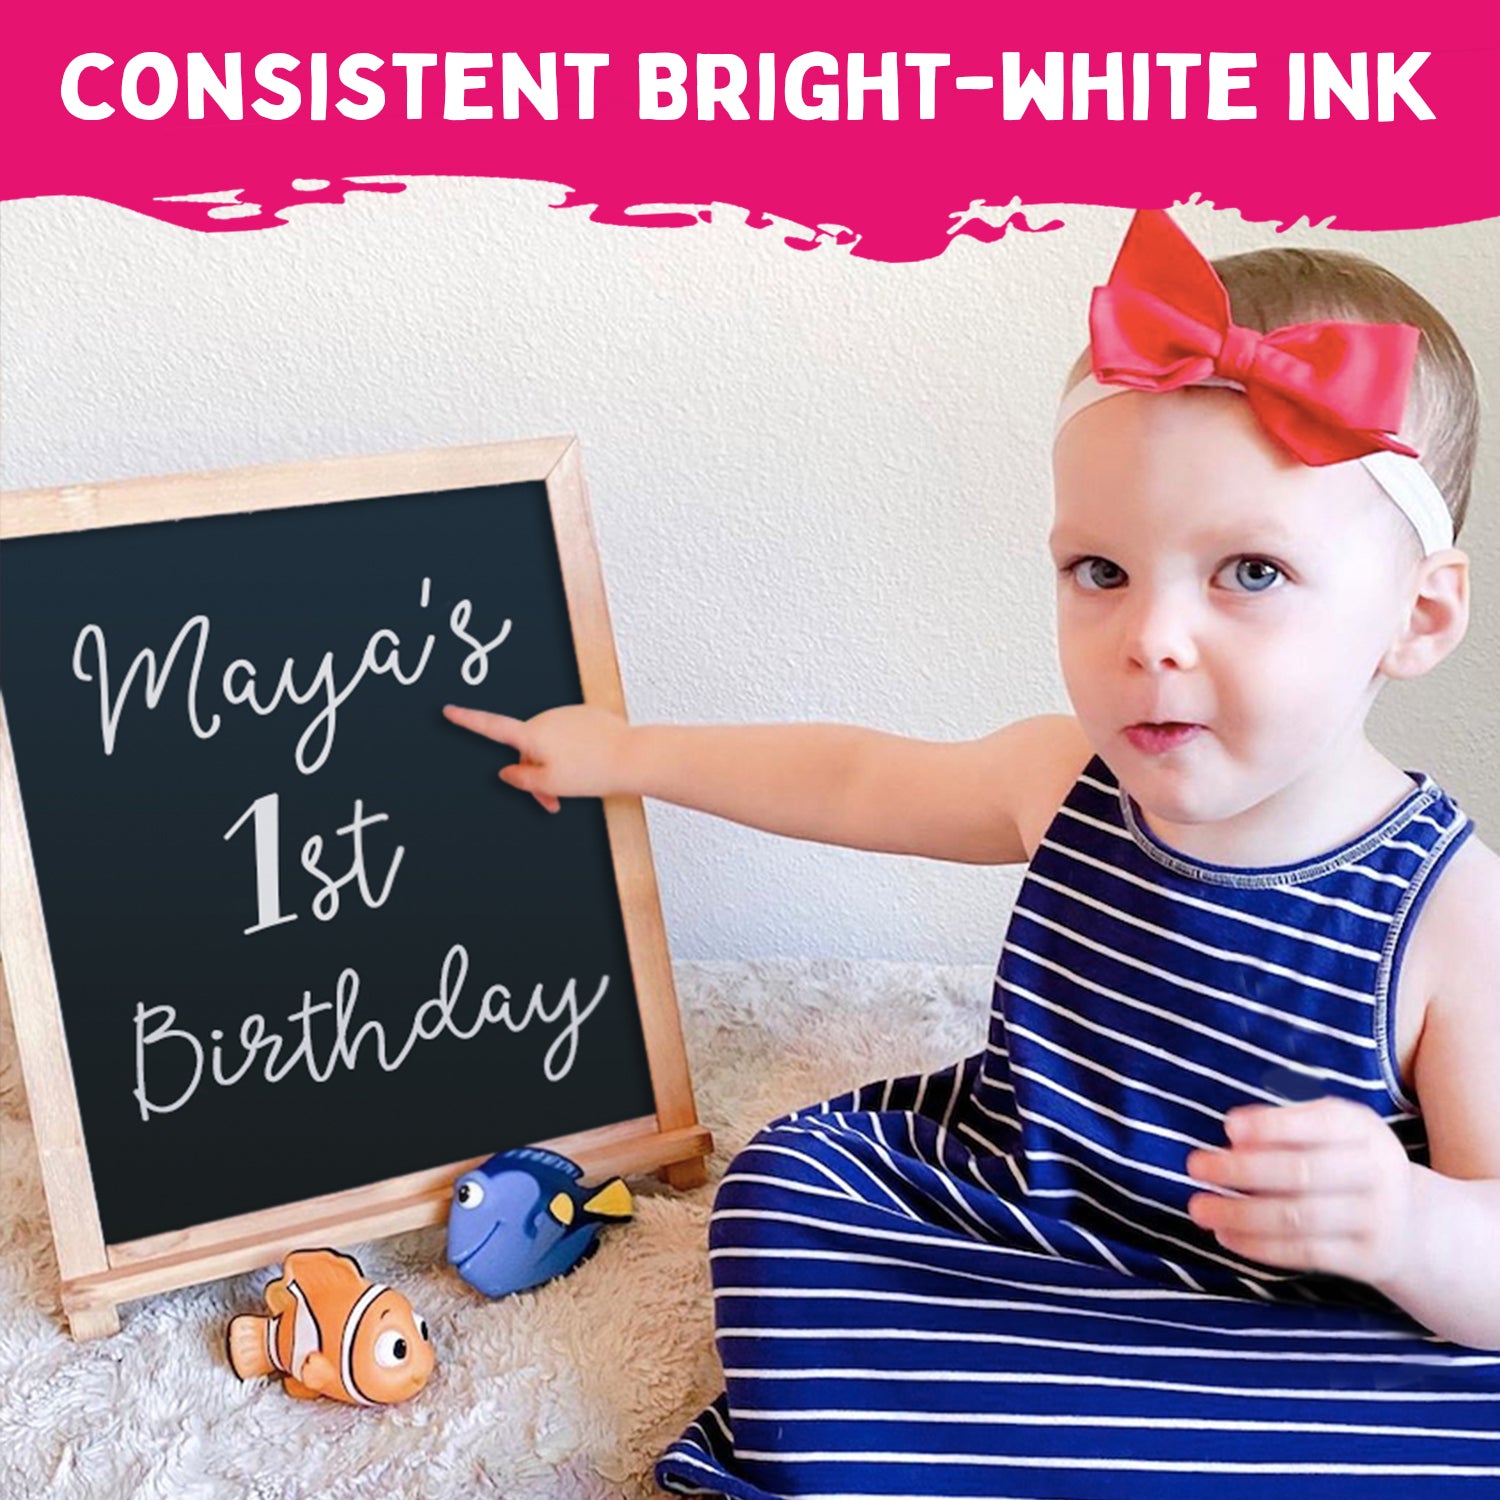 4-Pack White Erasable Chalk Markers - Non-Toxic, Water-Based, Reversible  Tips For Kids & Adults, Glass & Chalkboards